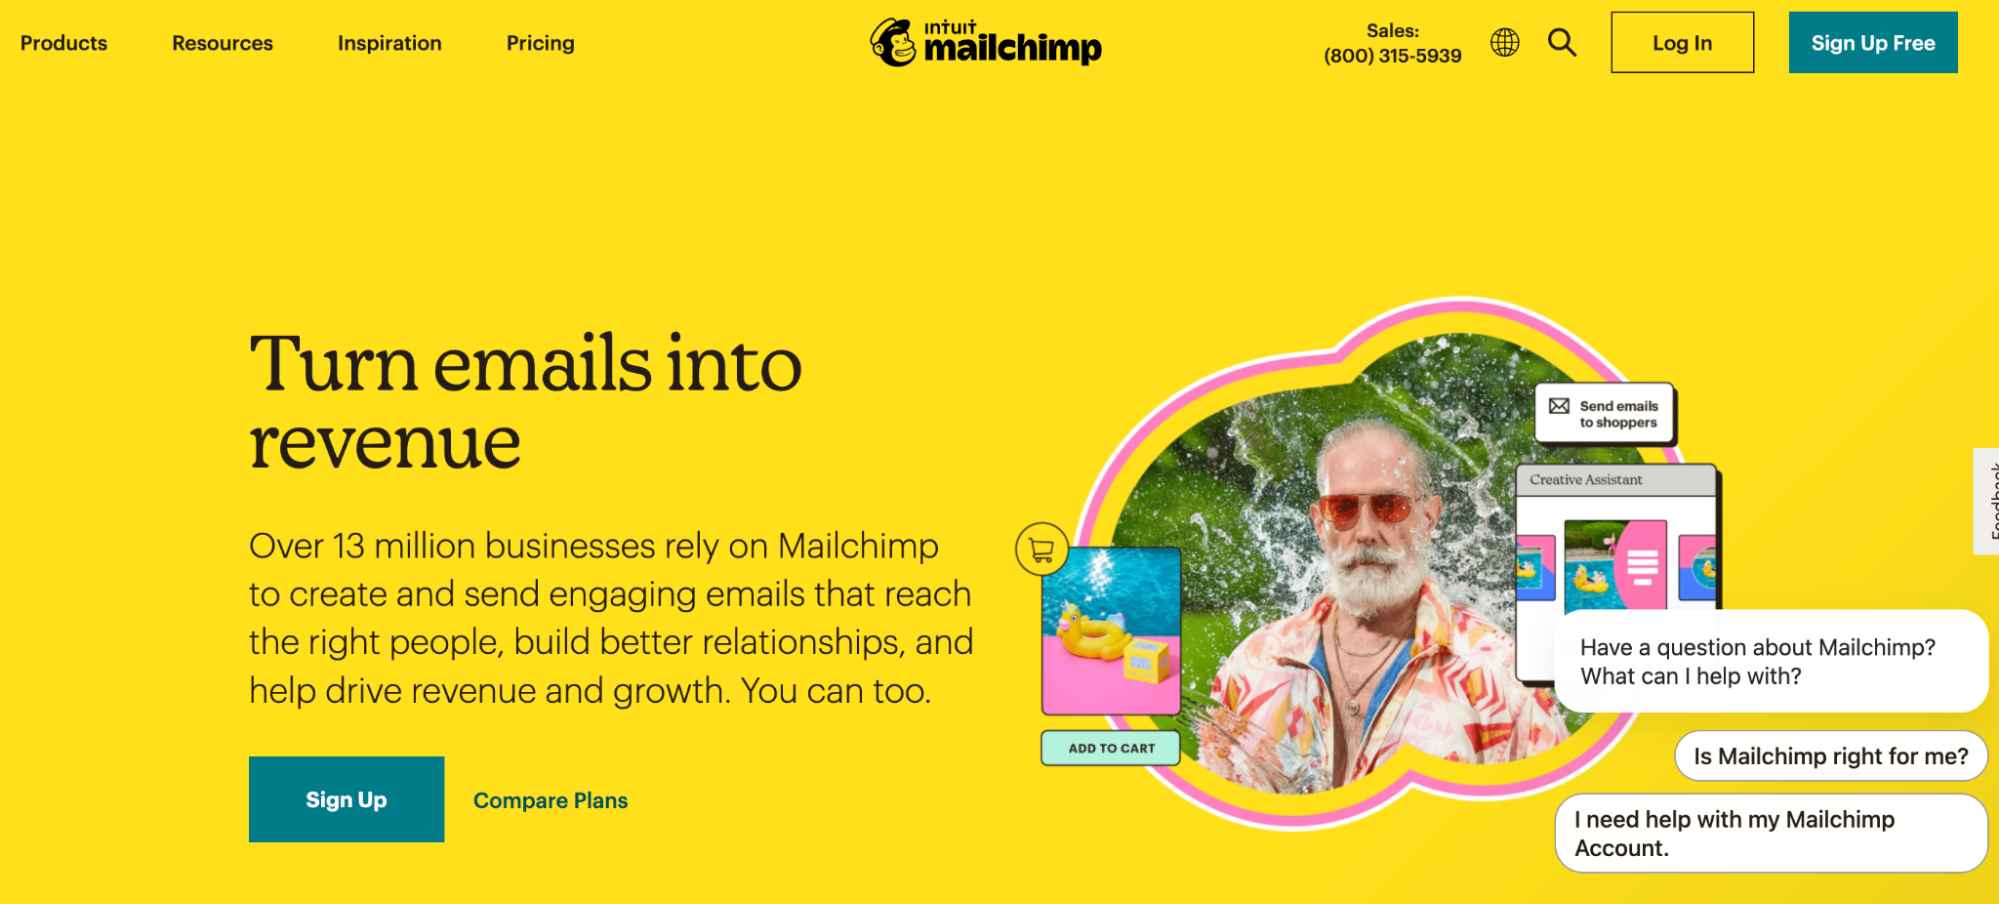  The homepage for Mailchimp